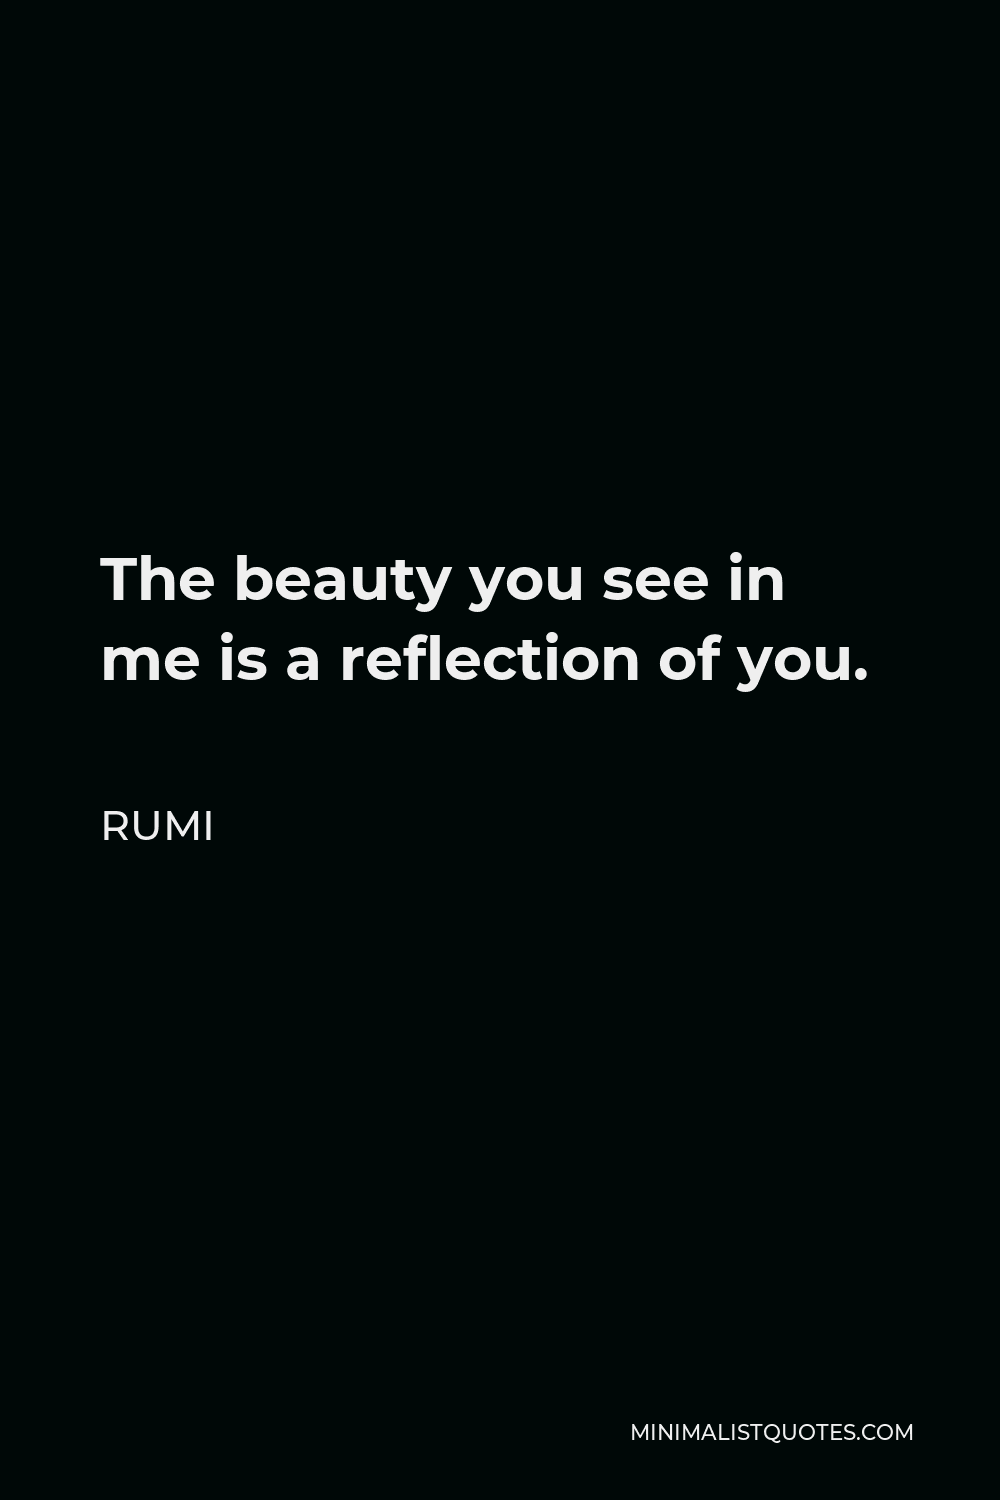 Rumi Quote - The beauty you see in me is a reflection of you.